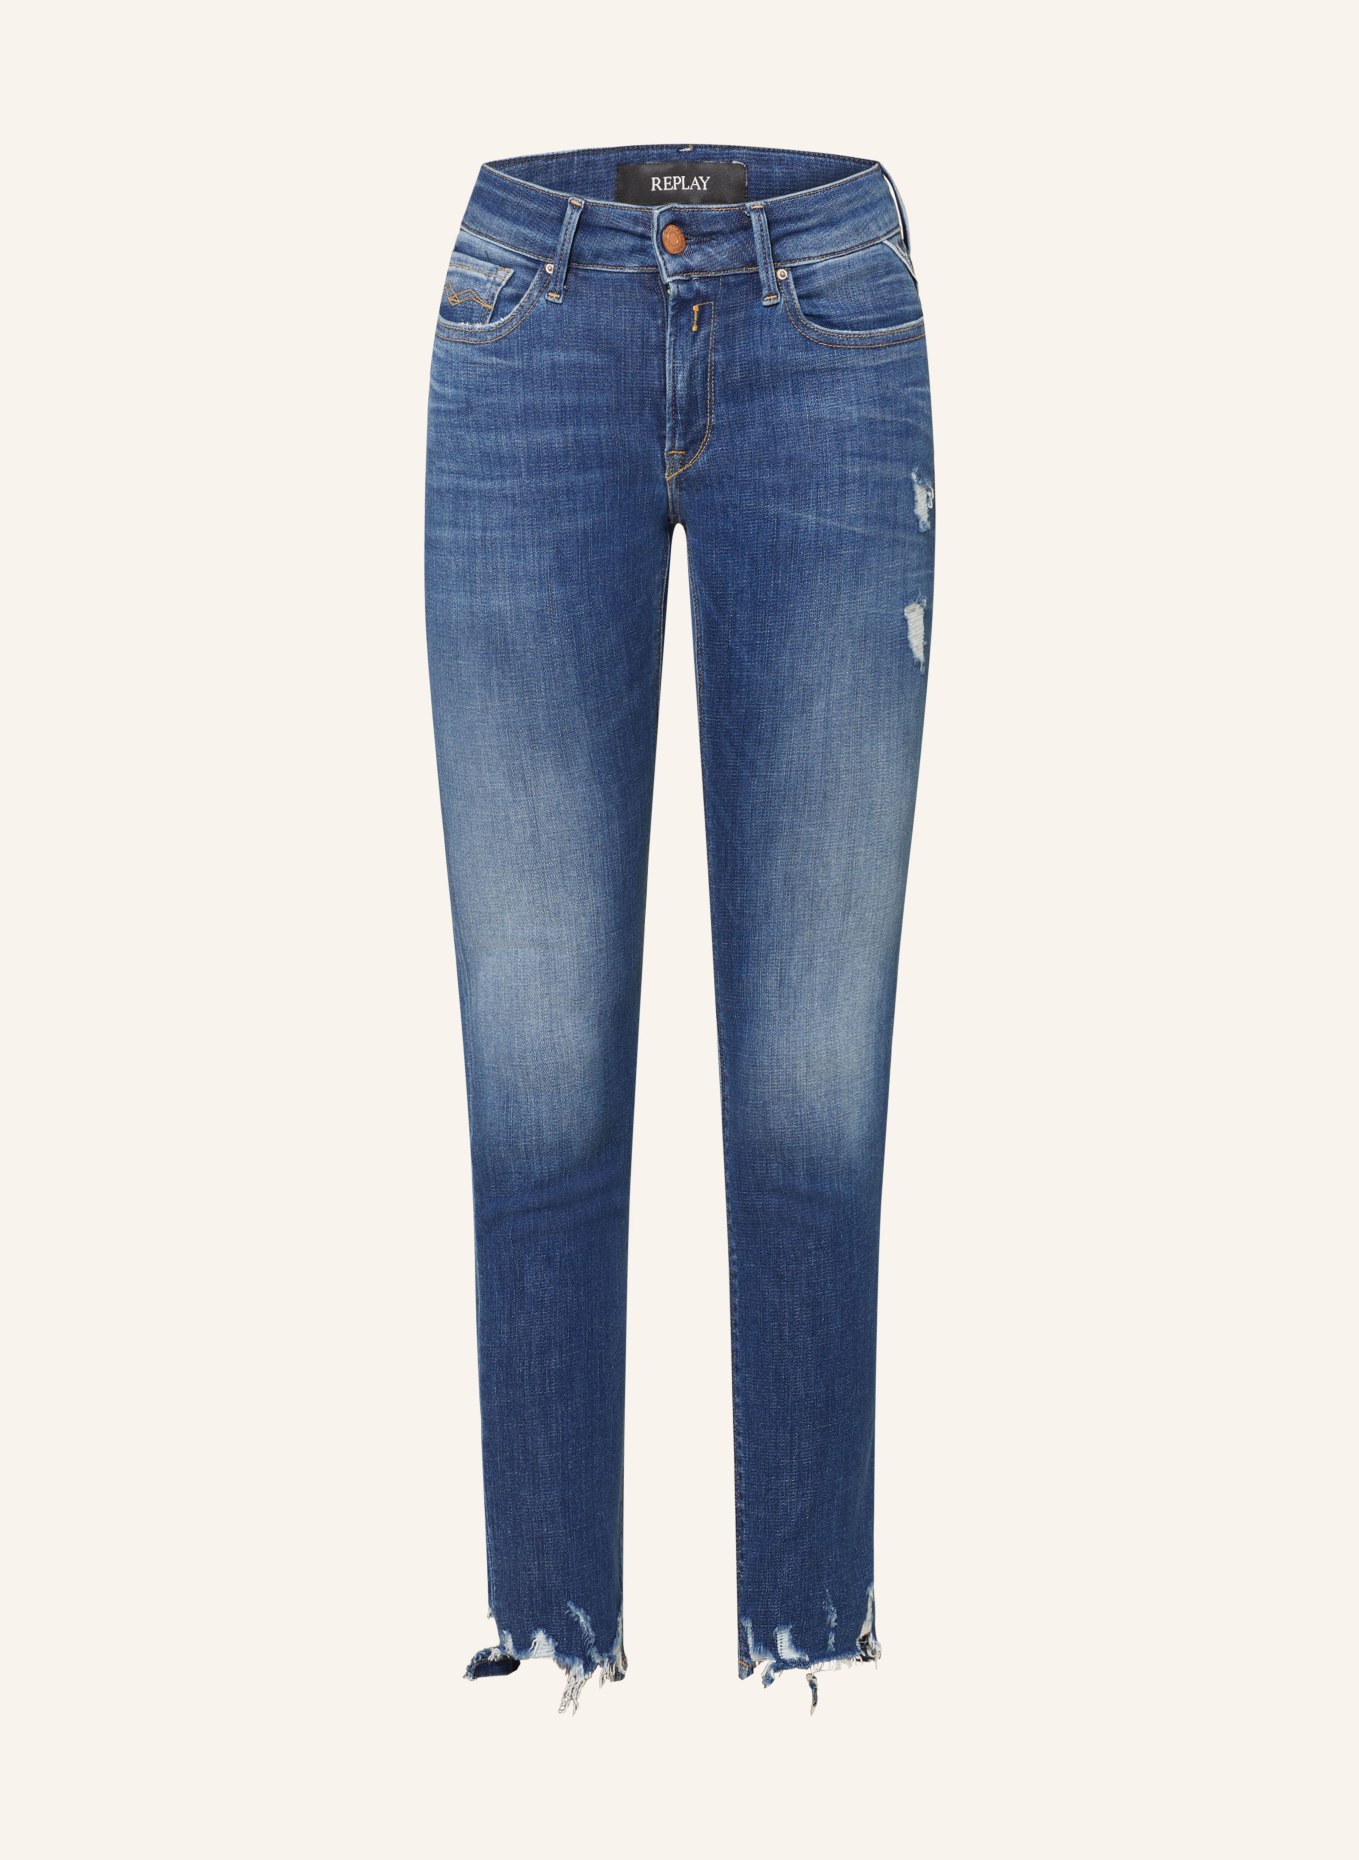 REPLAY Destroyed jeans NEW LUZ, Color: 009 MEDIUM BLUE (Image 1)